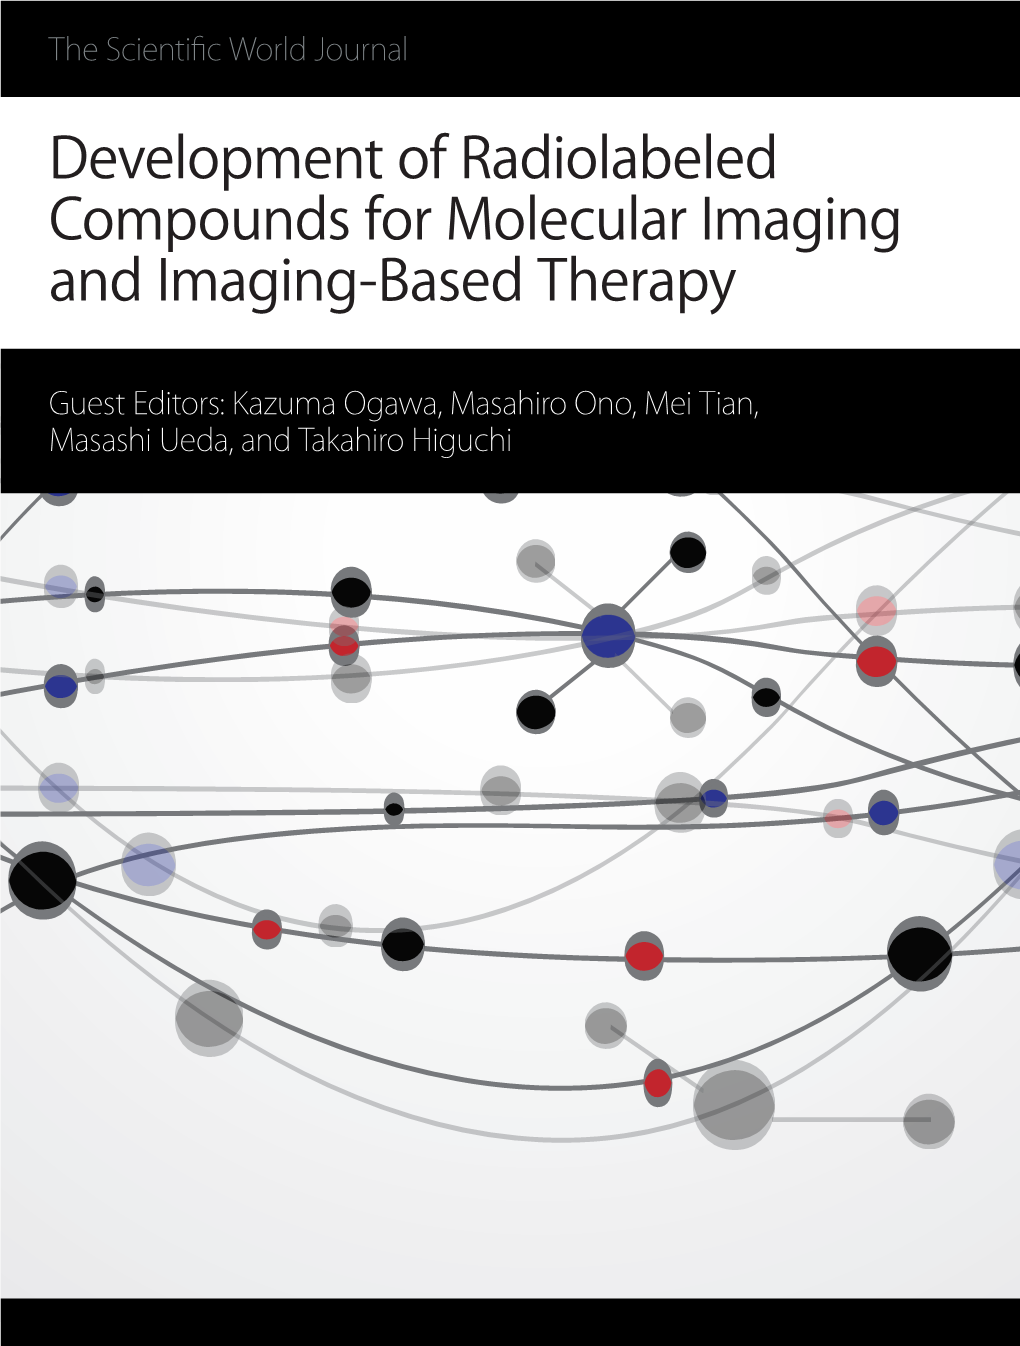 Development of Radiolabeled Compounds for Molecular Imaging and Imaging-Based Therapy